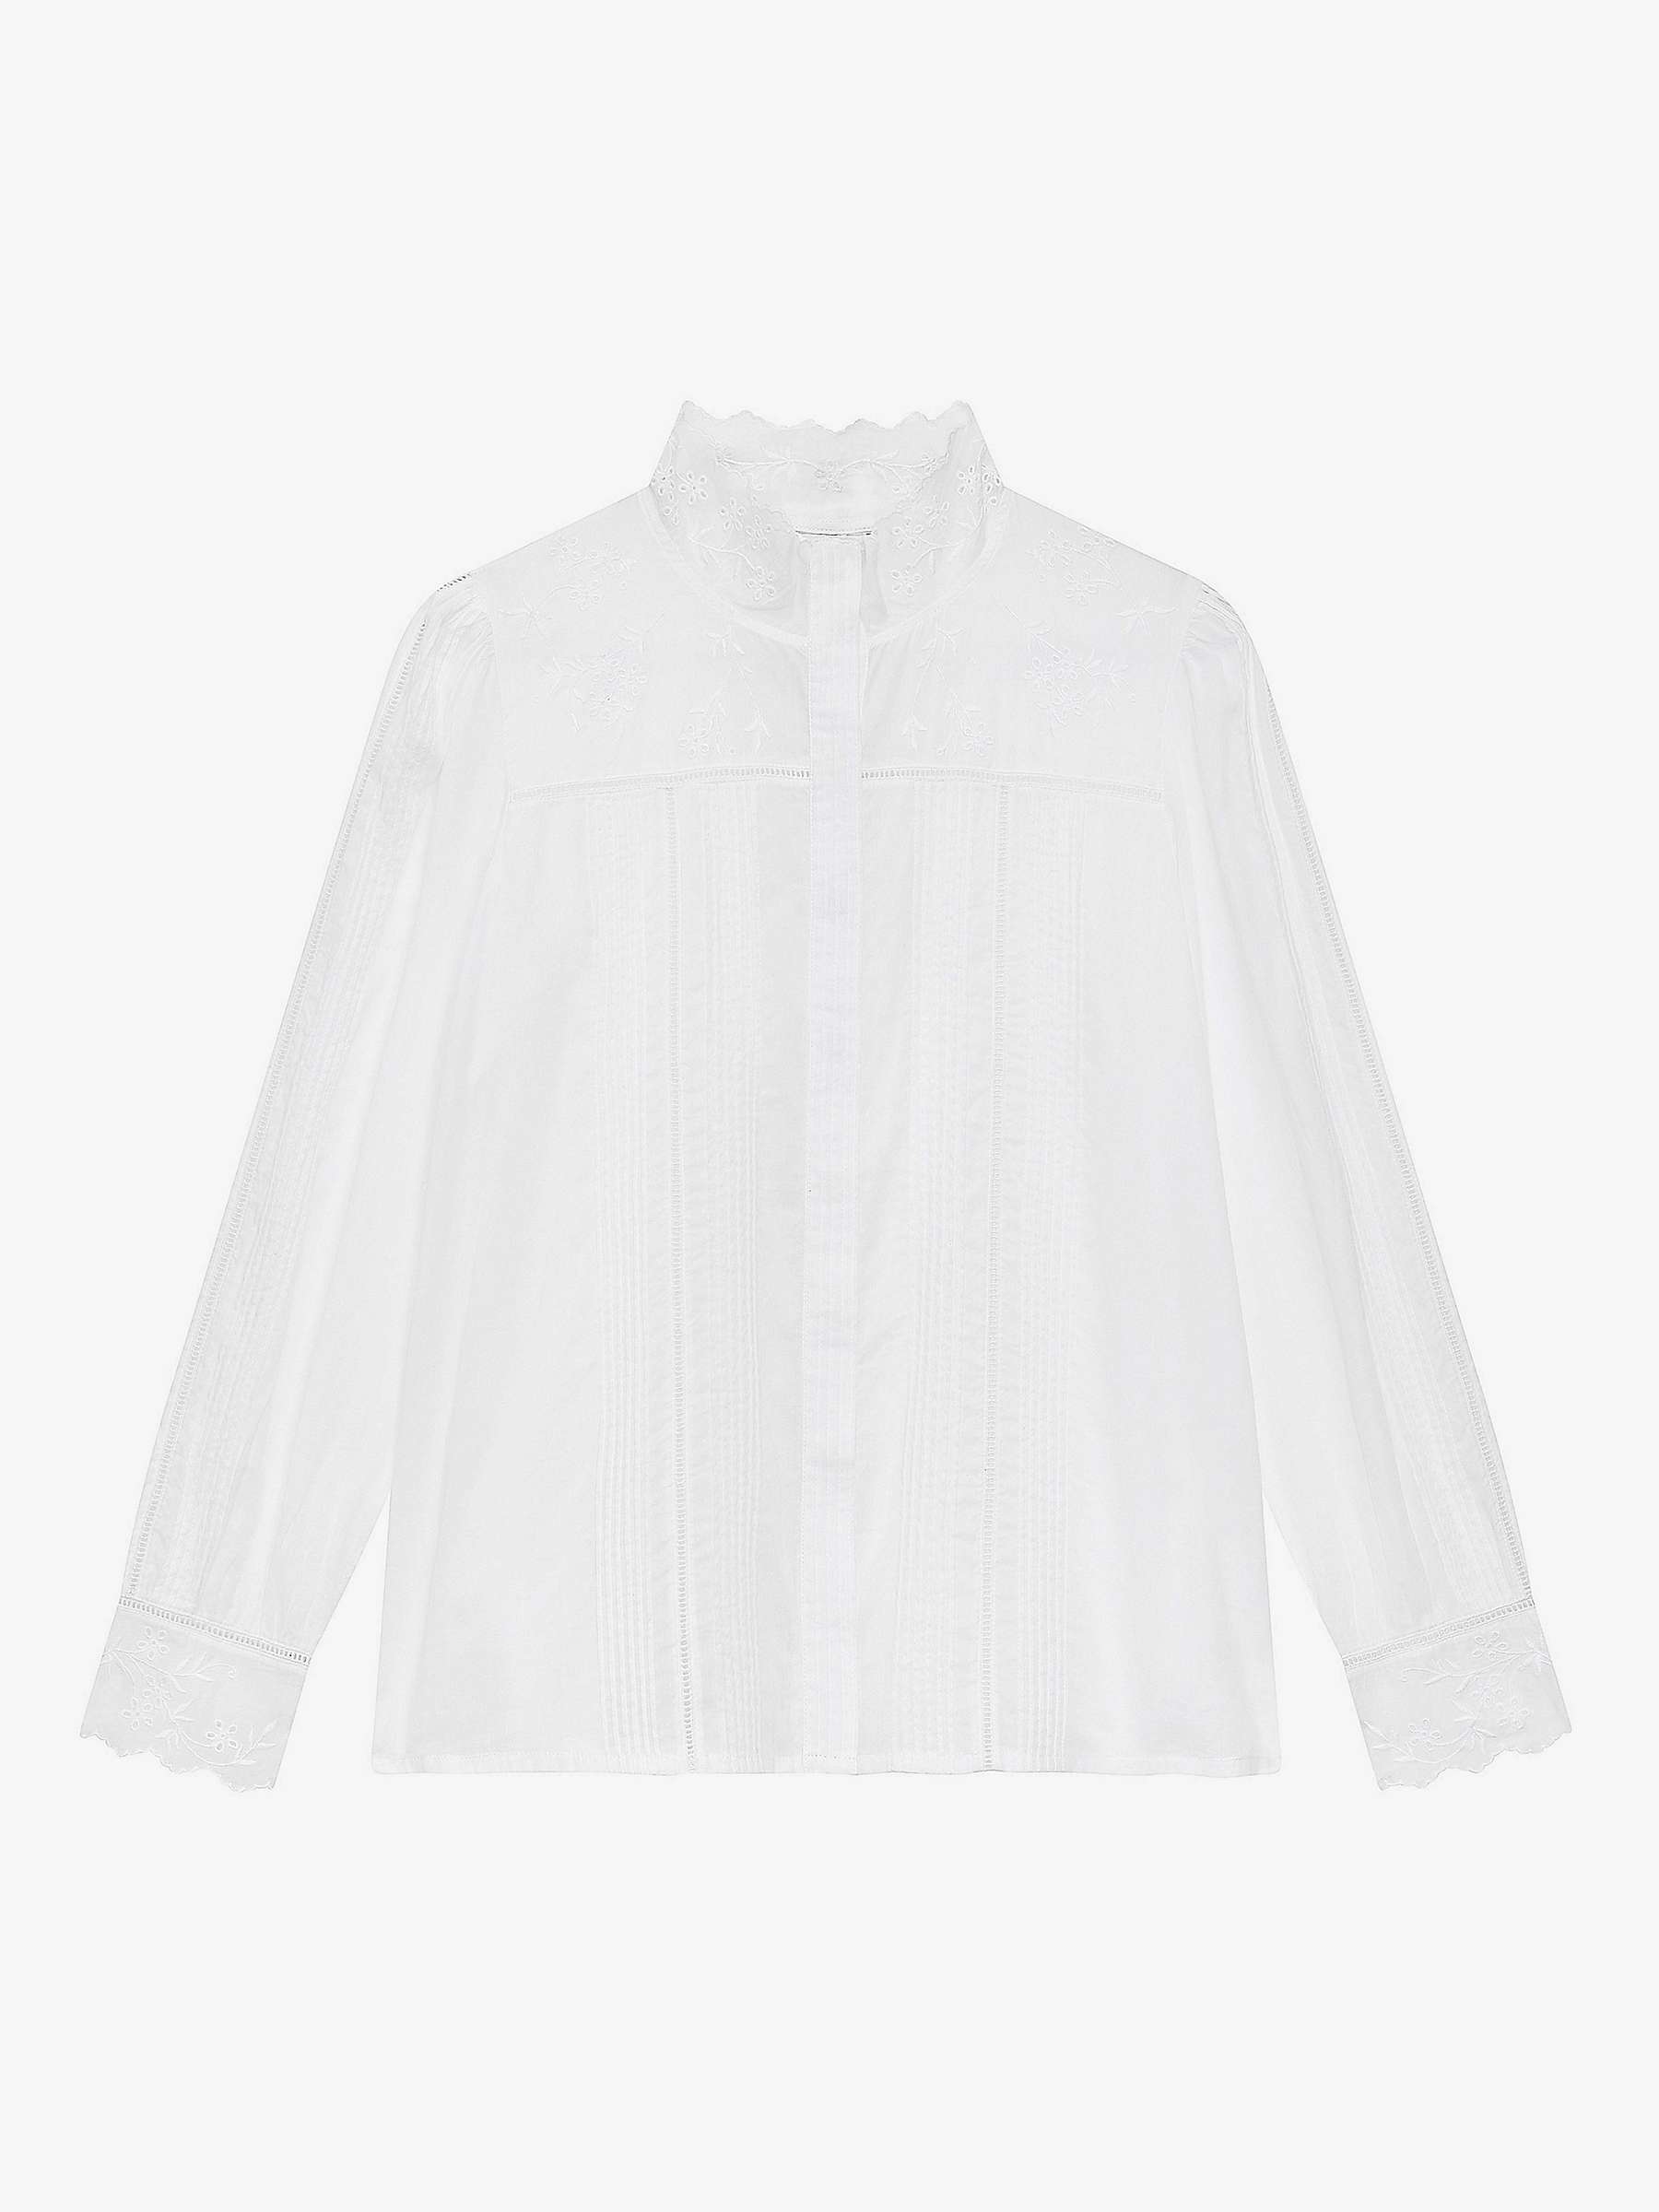 Buy Brora Organic Cotton Floral Embroidered Shirt, White Online at johnlewis.com